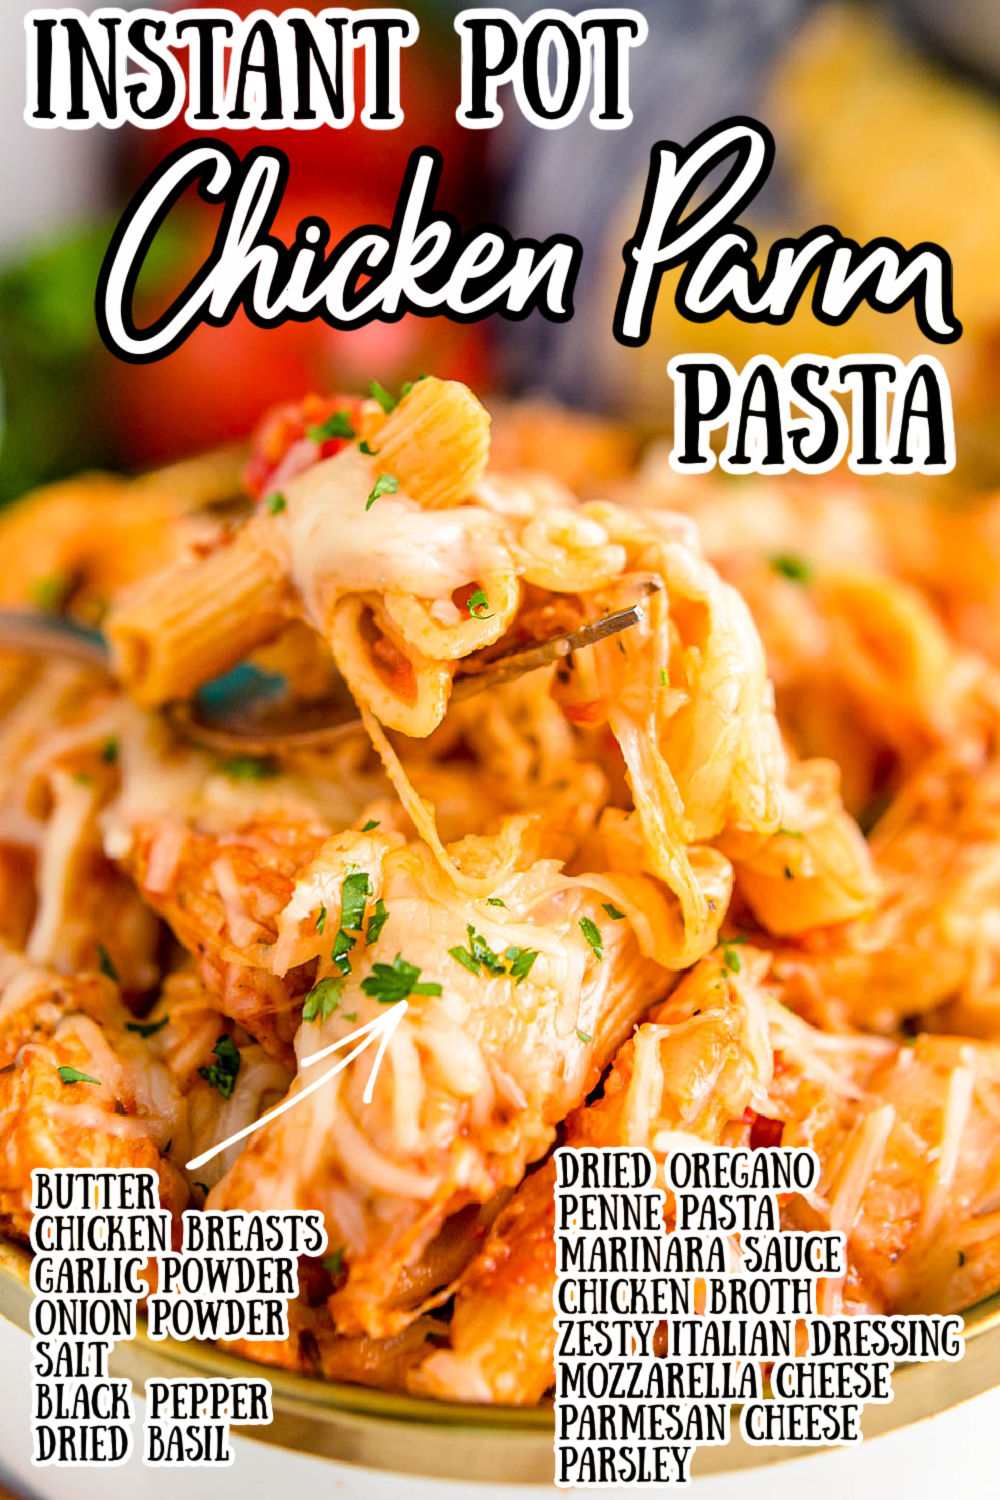 This Instant Pot Chicken Parmesan Pasta comes together in just 25 minutes for a quick weeknight dinner option loaded with tomato sauce, cheese, and chicken that everyone will love! via @sugarandsoulco